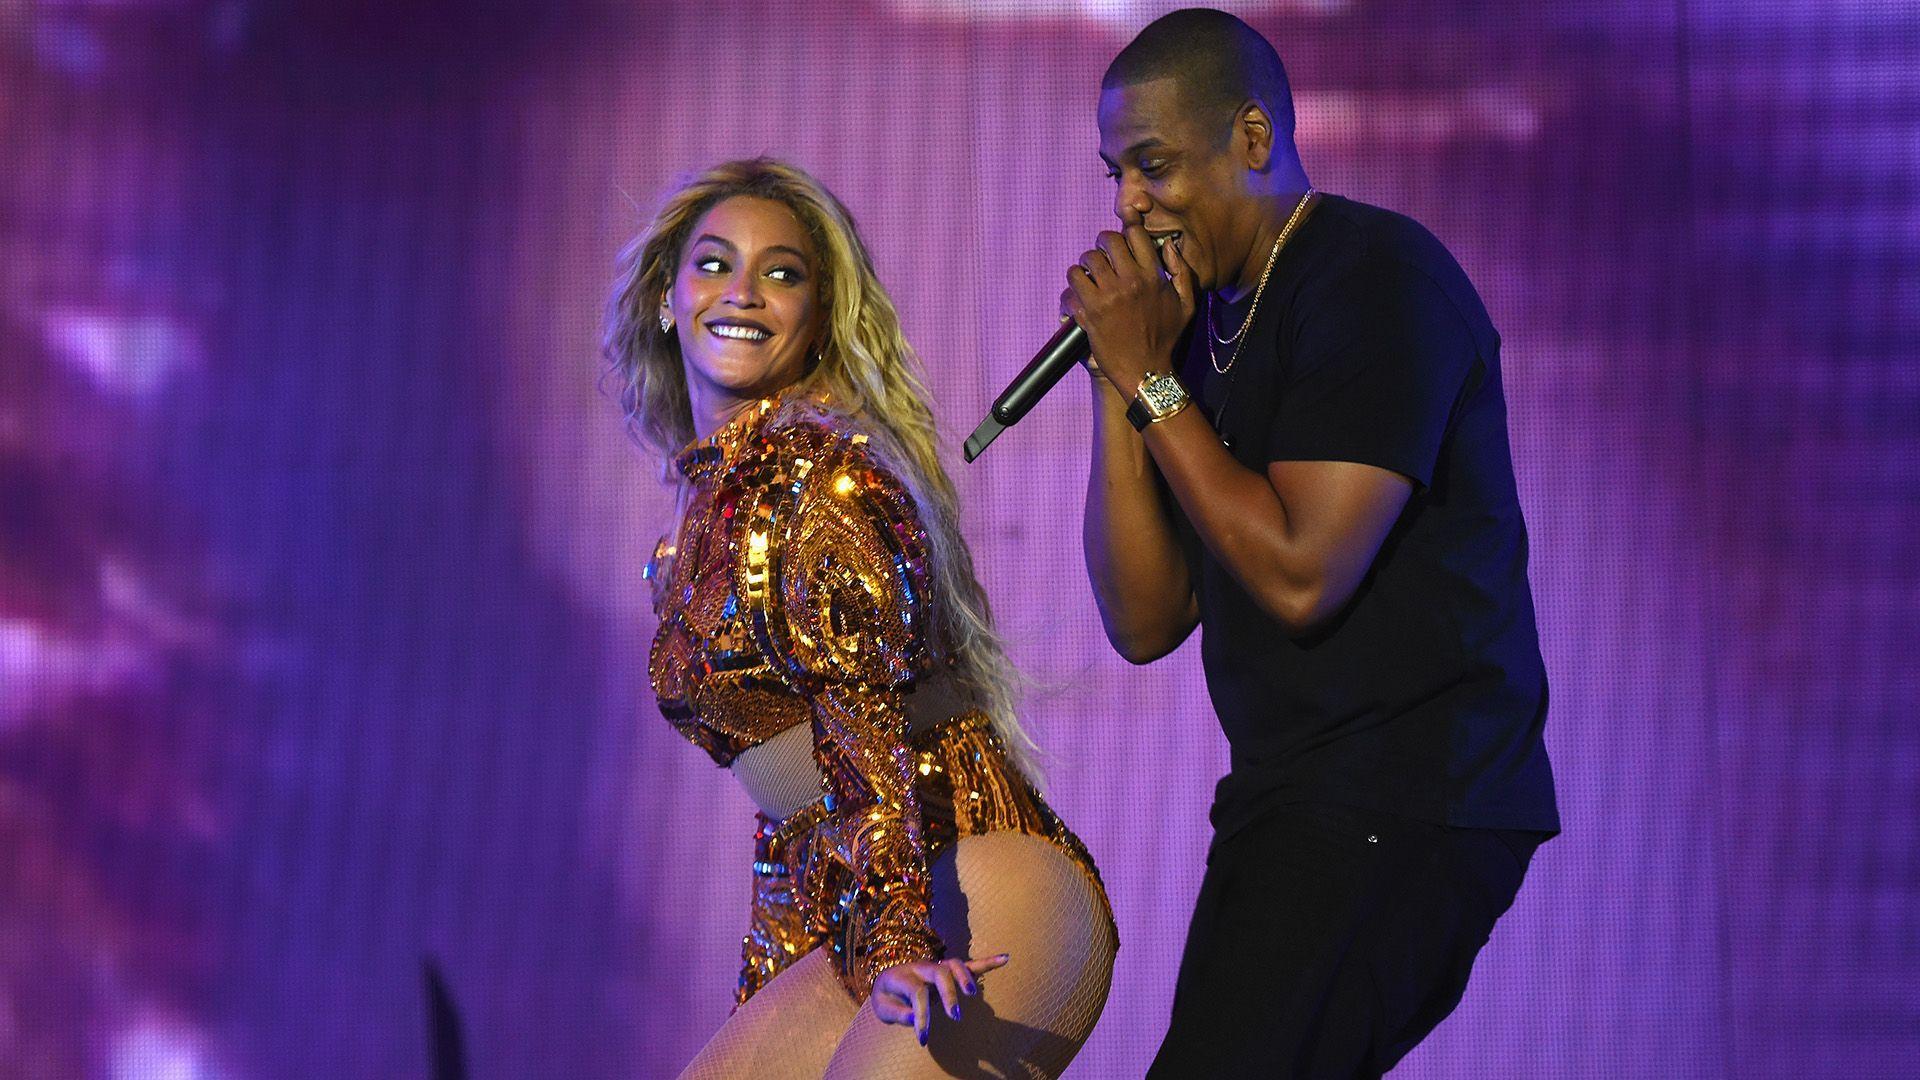 Why People Think Beyonce, Jay Z Are Going On Tour